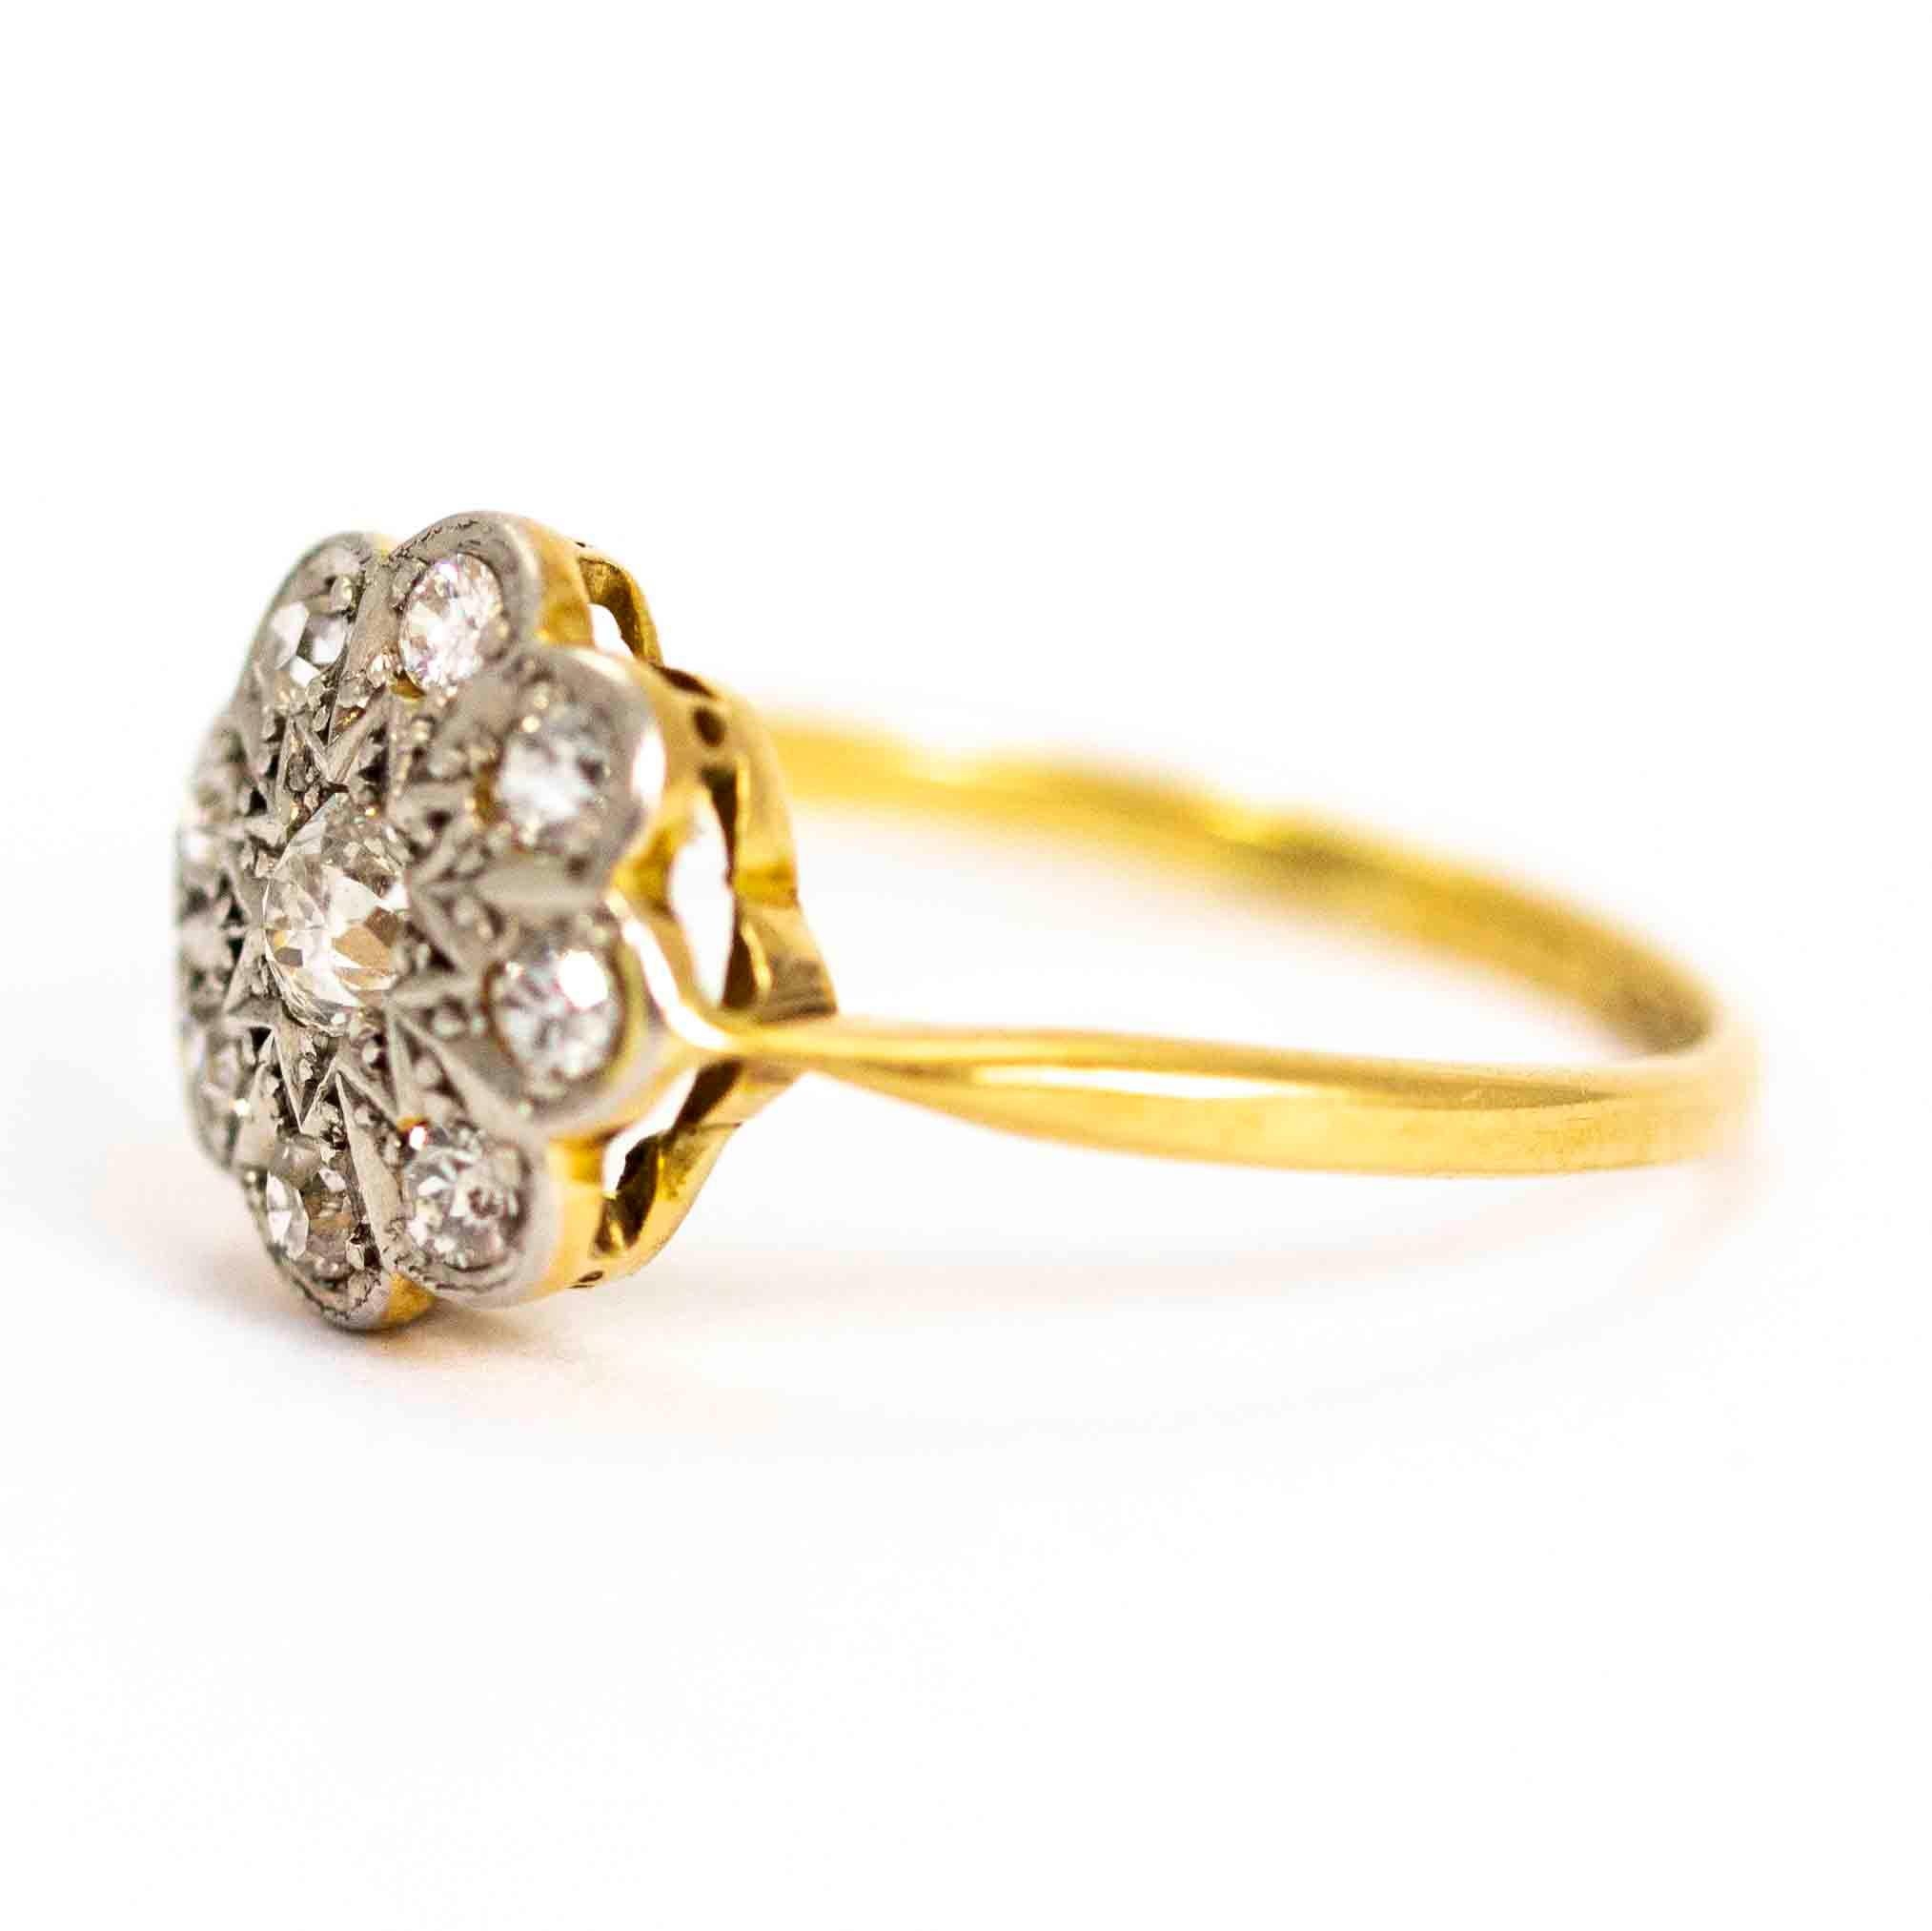 An exquisite vintage cluster ring set with nine stunning old mine cut white diamonds. The central stone measures approximately 10 points and  has a brilliant height. The diamonds in the surrounding halo measure approximately 8 points each. Total